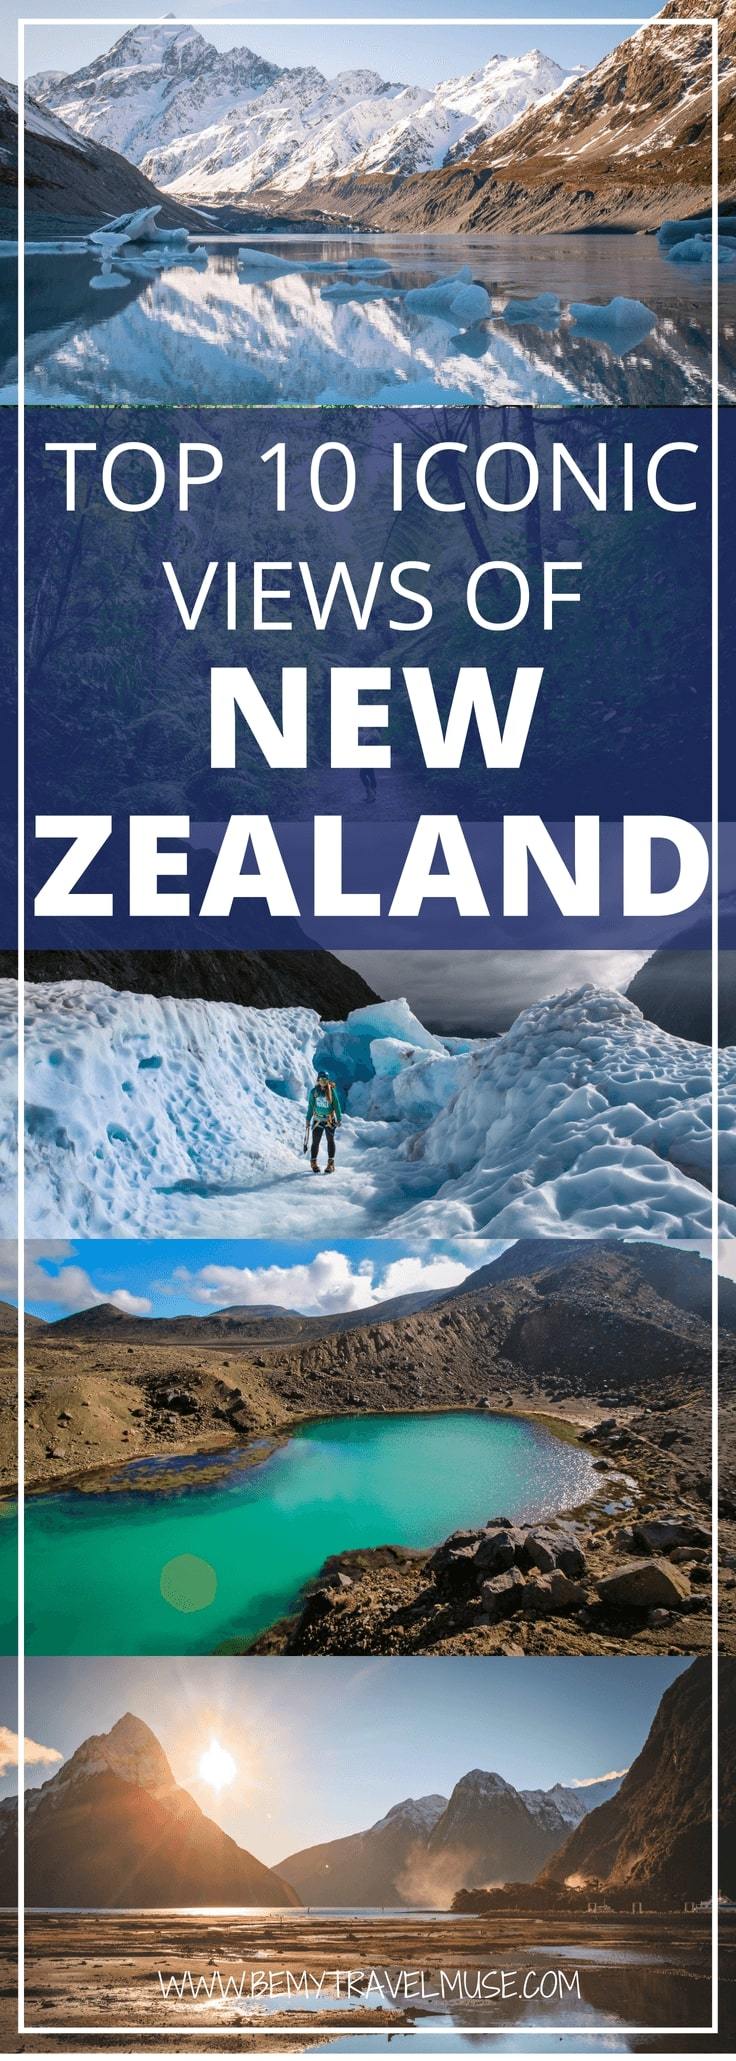 Traveling to New Zealand? Here are 10 iconic views that you truly can't miss. New Zealand is stunning and a photographer's dream. In this article, Liz from Young Adventuress rounds up top 10 iconic views of New Zealand that you need to add to your bucket list. Check it out! #NewZealand #NewZealandTravelTips